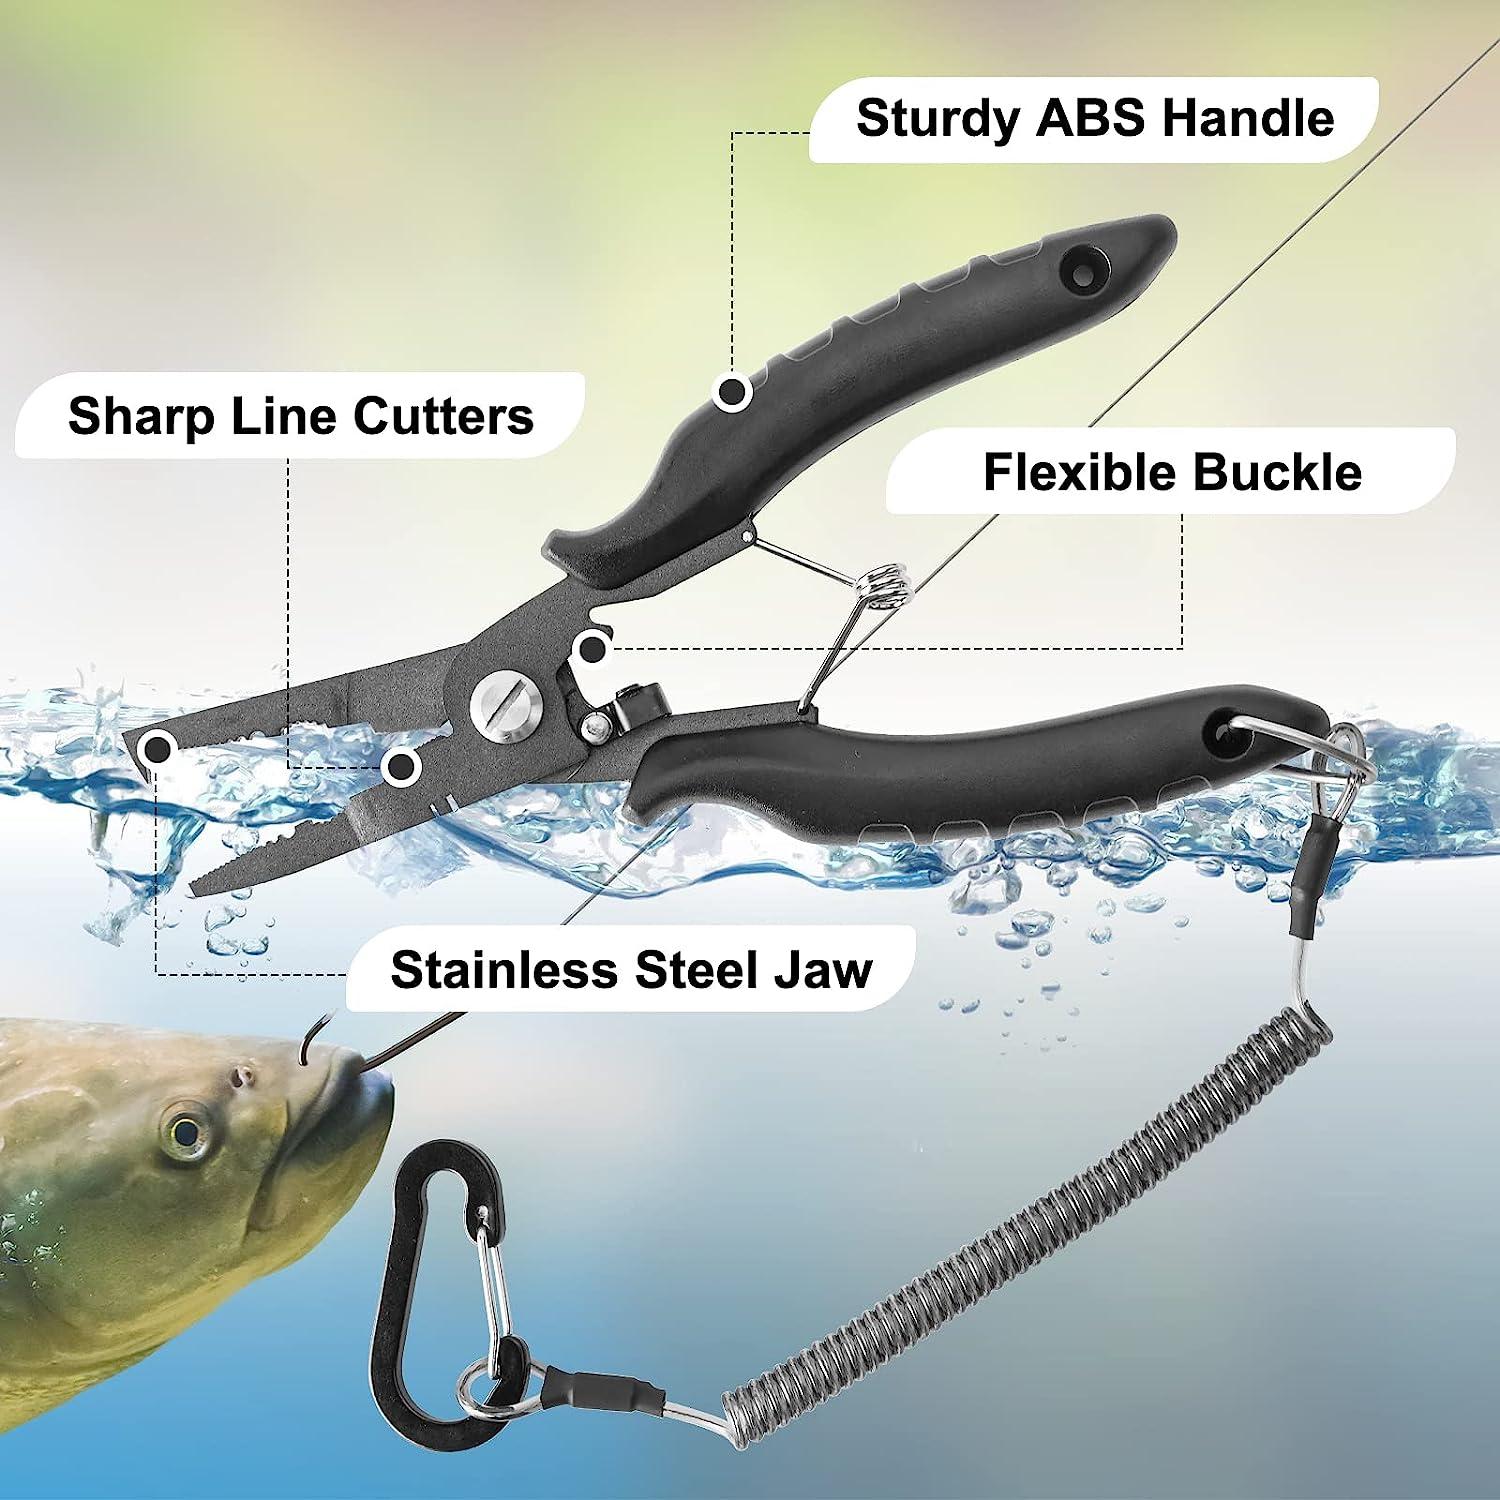 Fishing Pliers, Fish Lip Gripper, Stainless Steel Fishing Tools Set,  Multifunctional Fishing Accessories, Portable Fish Gripper With Wrist Strap,  Fishing Pliers Saltwater, Fishing Gifts for Men